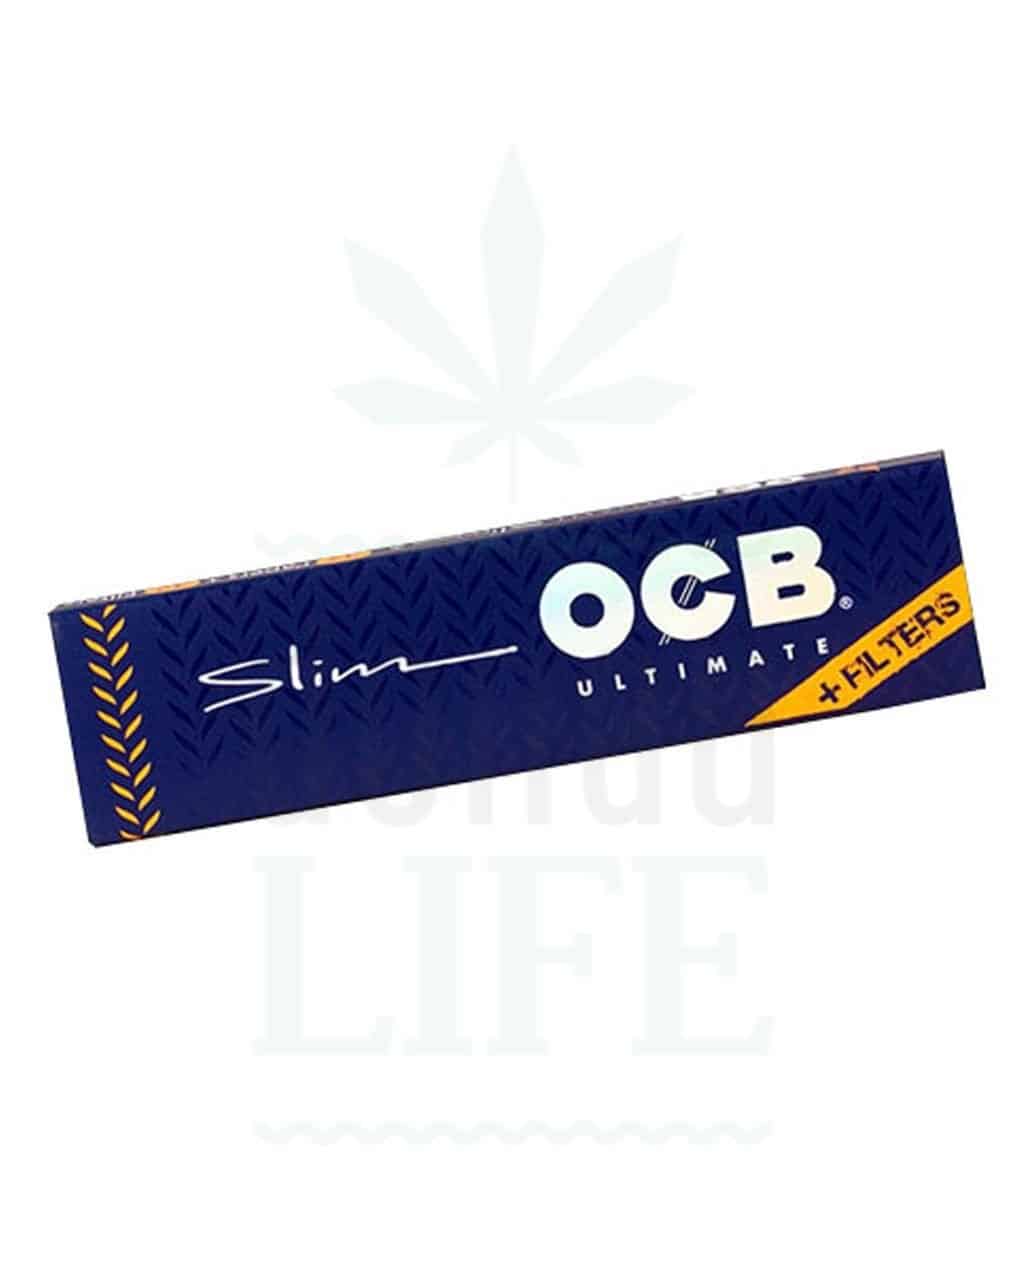 Headshop OCB ‘ULTIMATE’ KSS Papers + Filter Tips